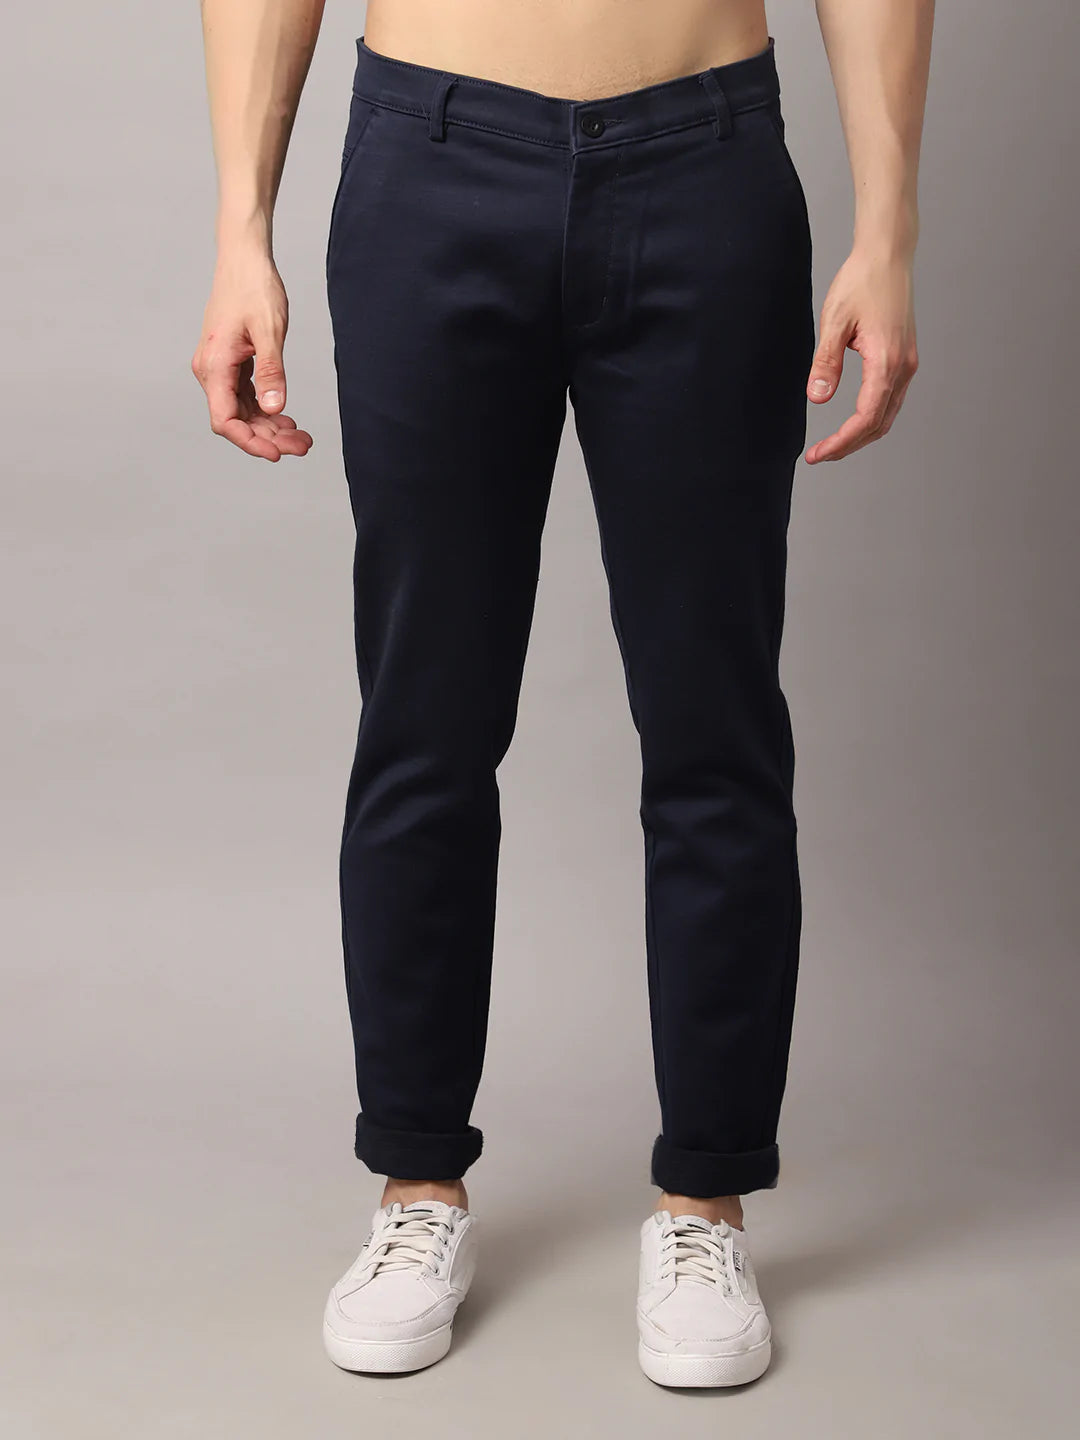 Men Navy Blue Slim Fit Chinos Trousers